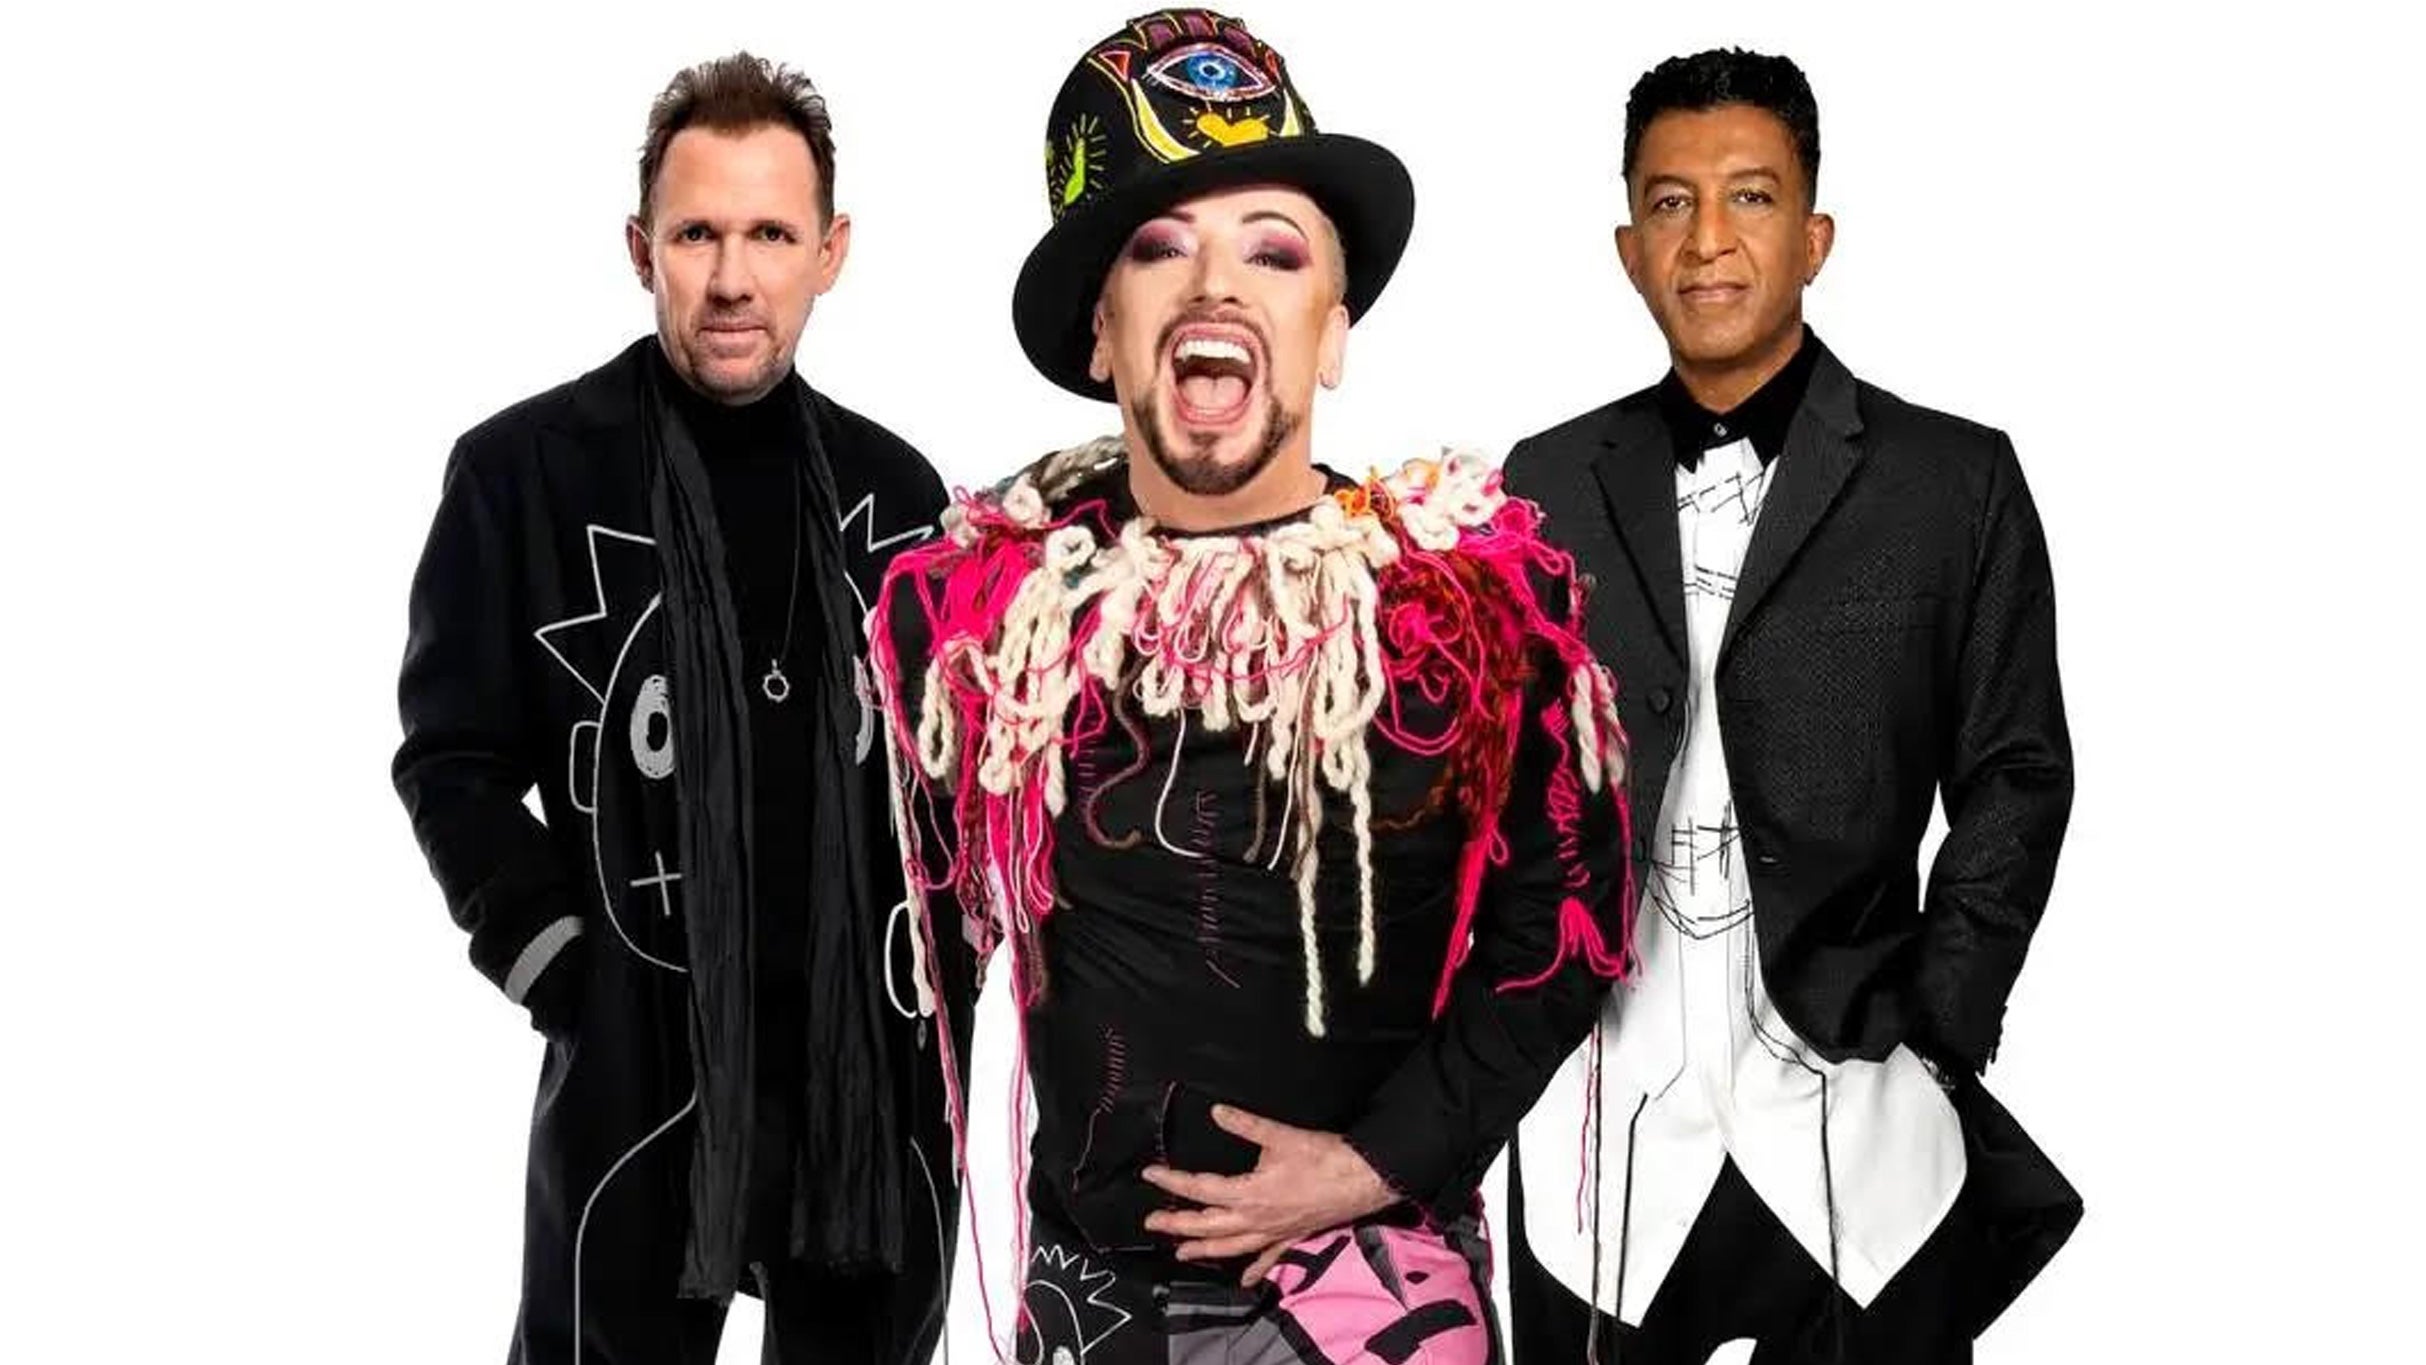 Boy George & Culture Club: The Letting It Go Show in Woodlands promo photo for Xfinity presale offer code